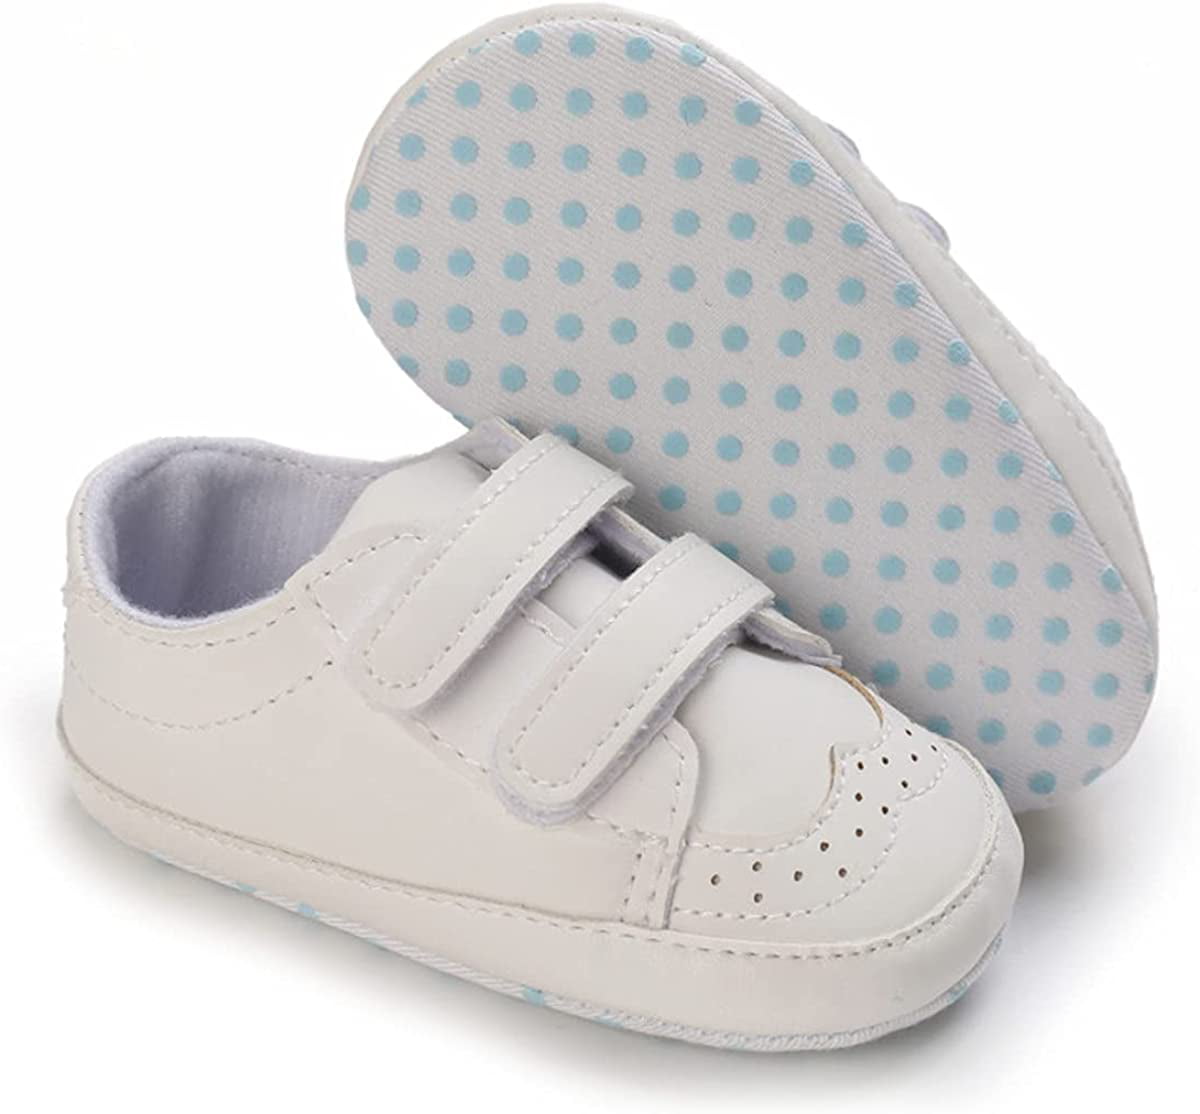 Baby Newborn First Walkers Toddler Sneakers Soft Sole Non-Slip Crib  Shoes